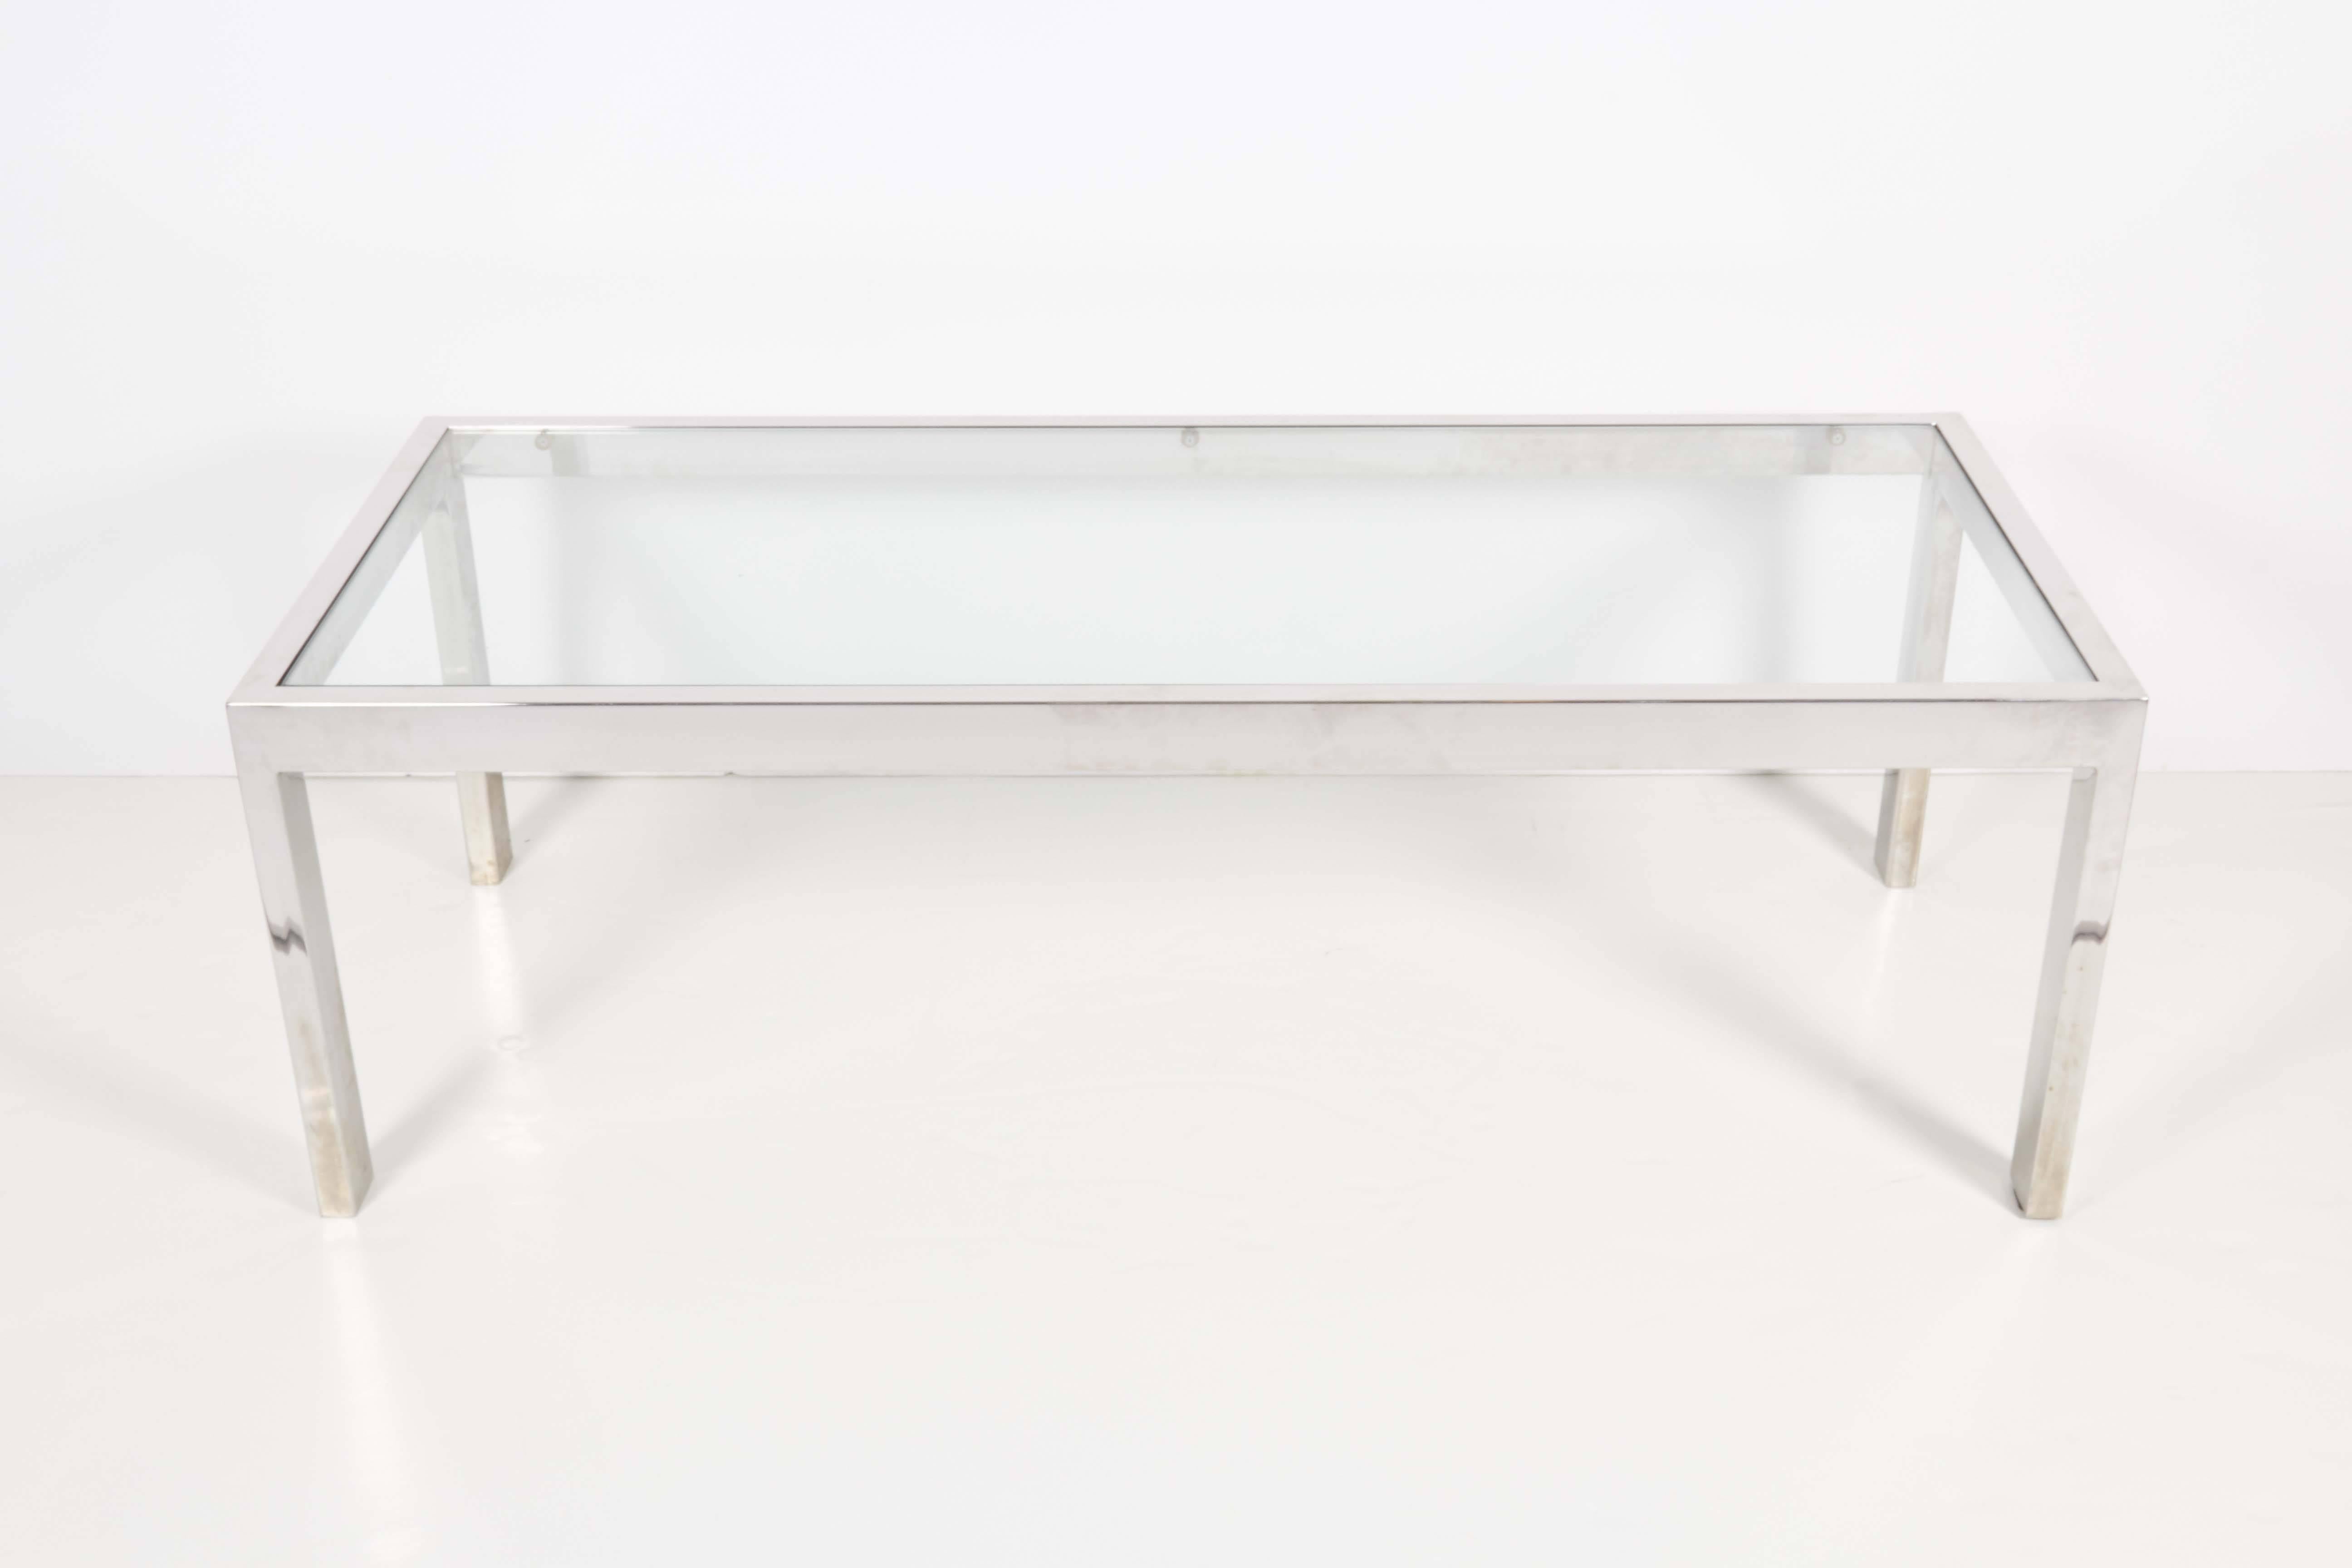 A modernist style coffee and cocktail table, produced circa 1970s, with rectilinear chrome frame and glass top inset. Very good vintage condition, wear to metal consistent with age and use.

10362